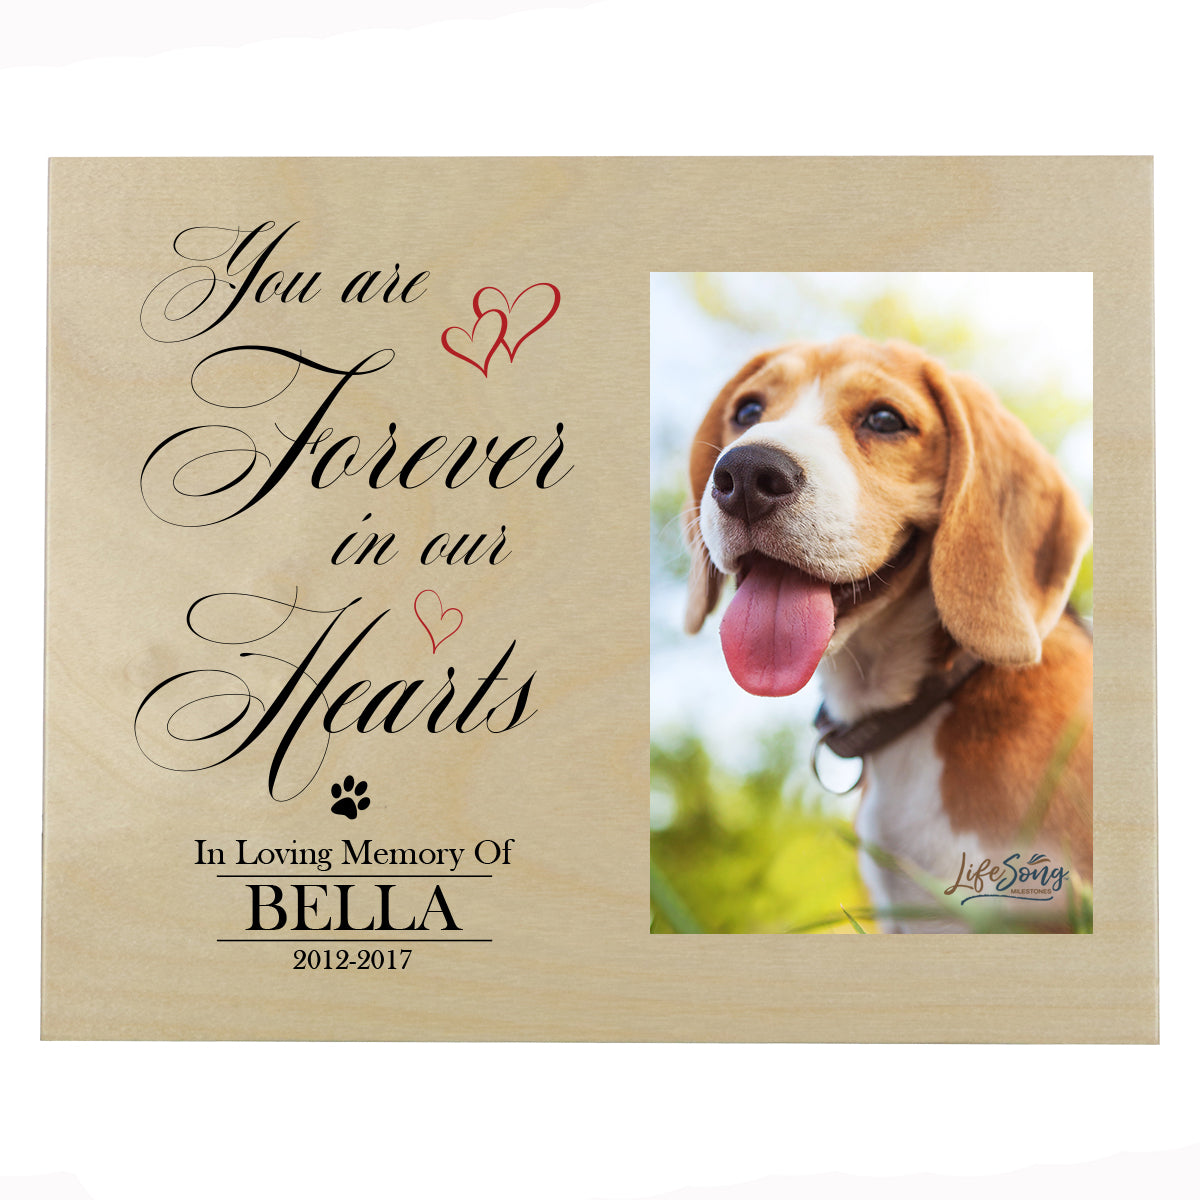 Pet Memorial Photo Wall Plaque Décor - You Are Forever In Our Hearts